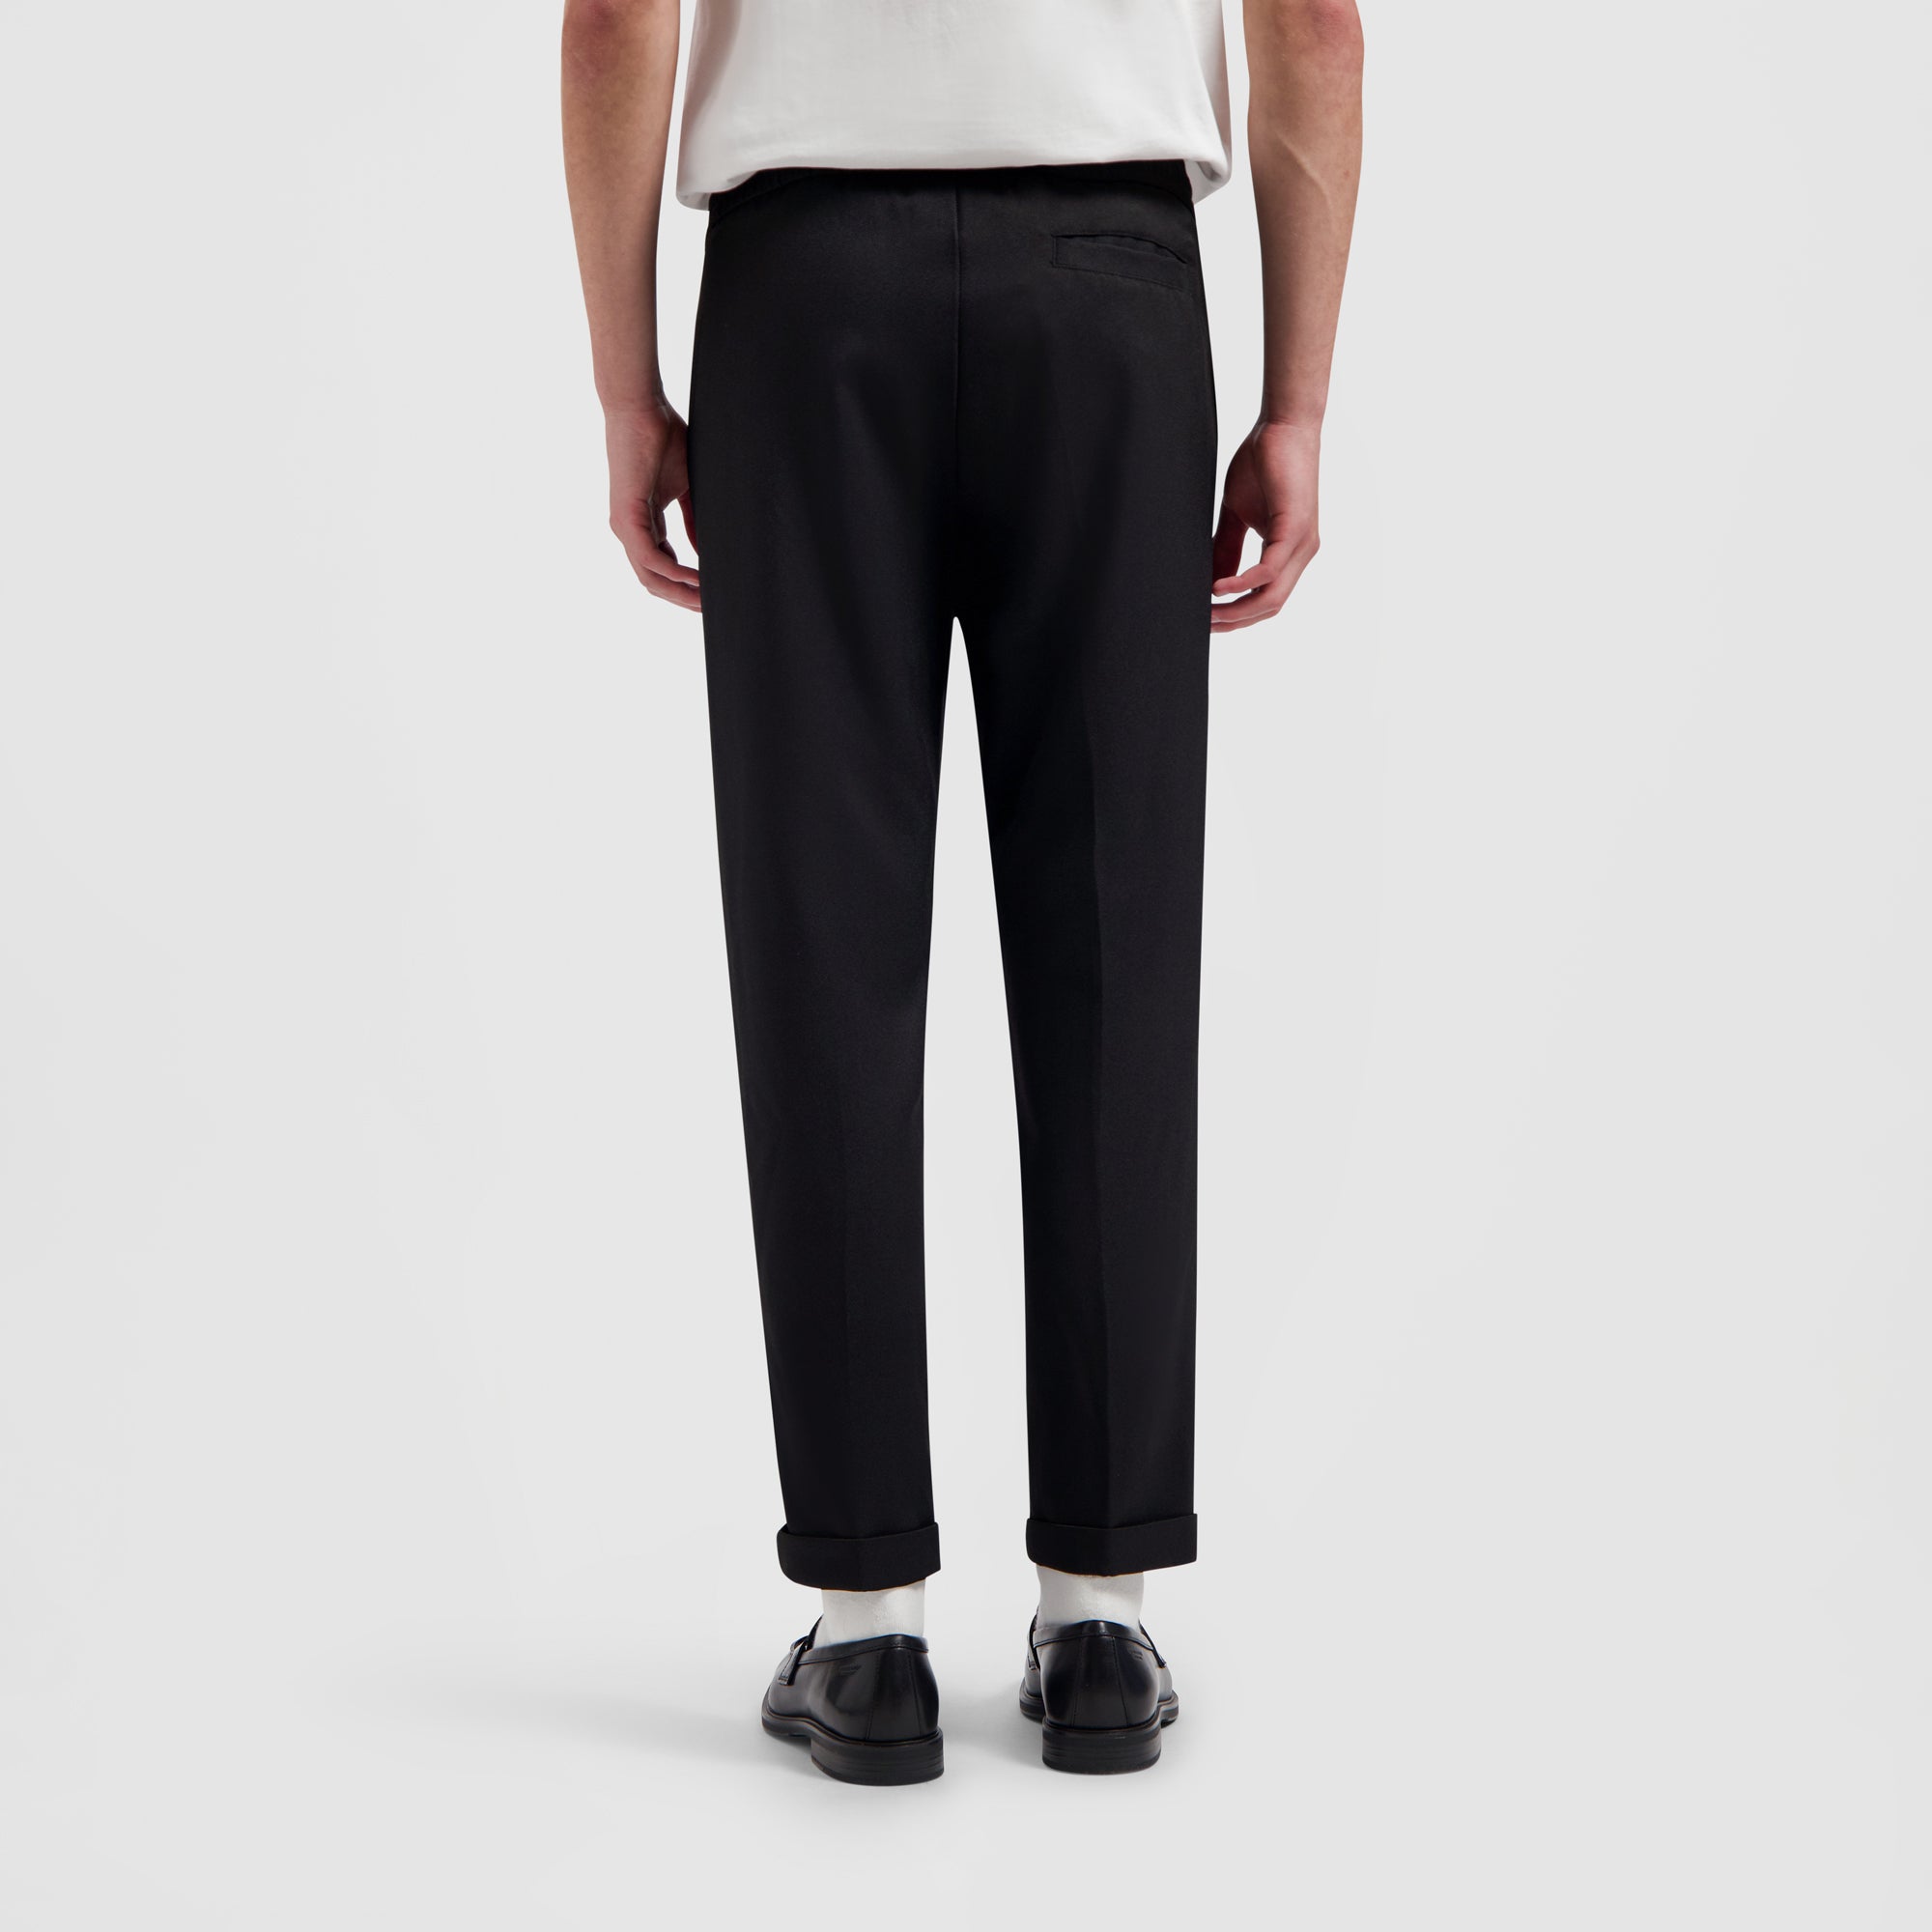 Comfort fit trousers with large pockets and chain